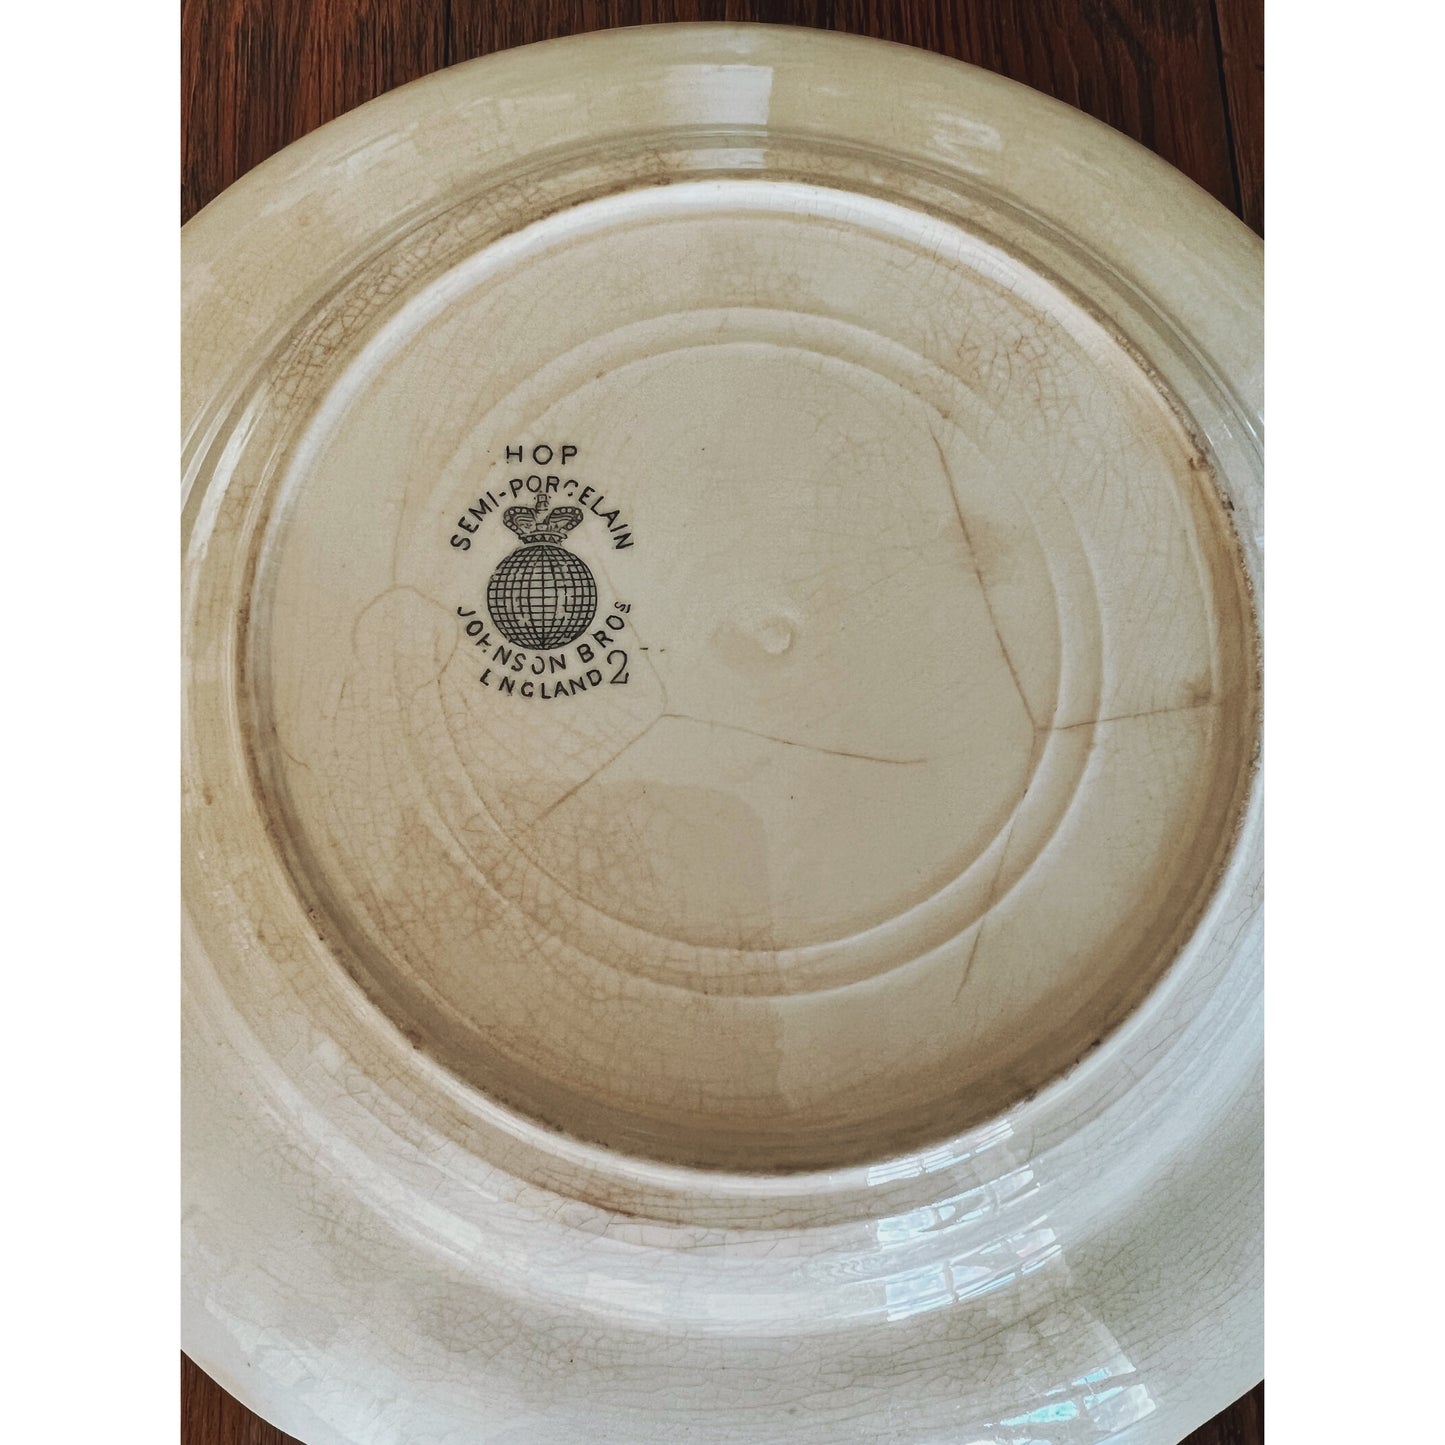 Curated Set of 4 Transferware Soup Bowls